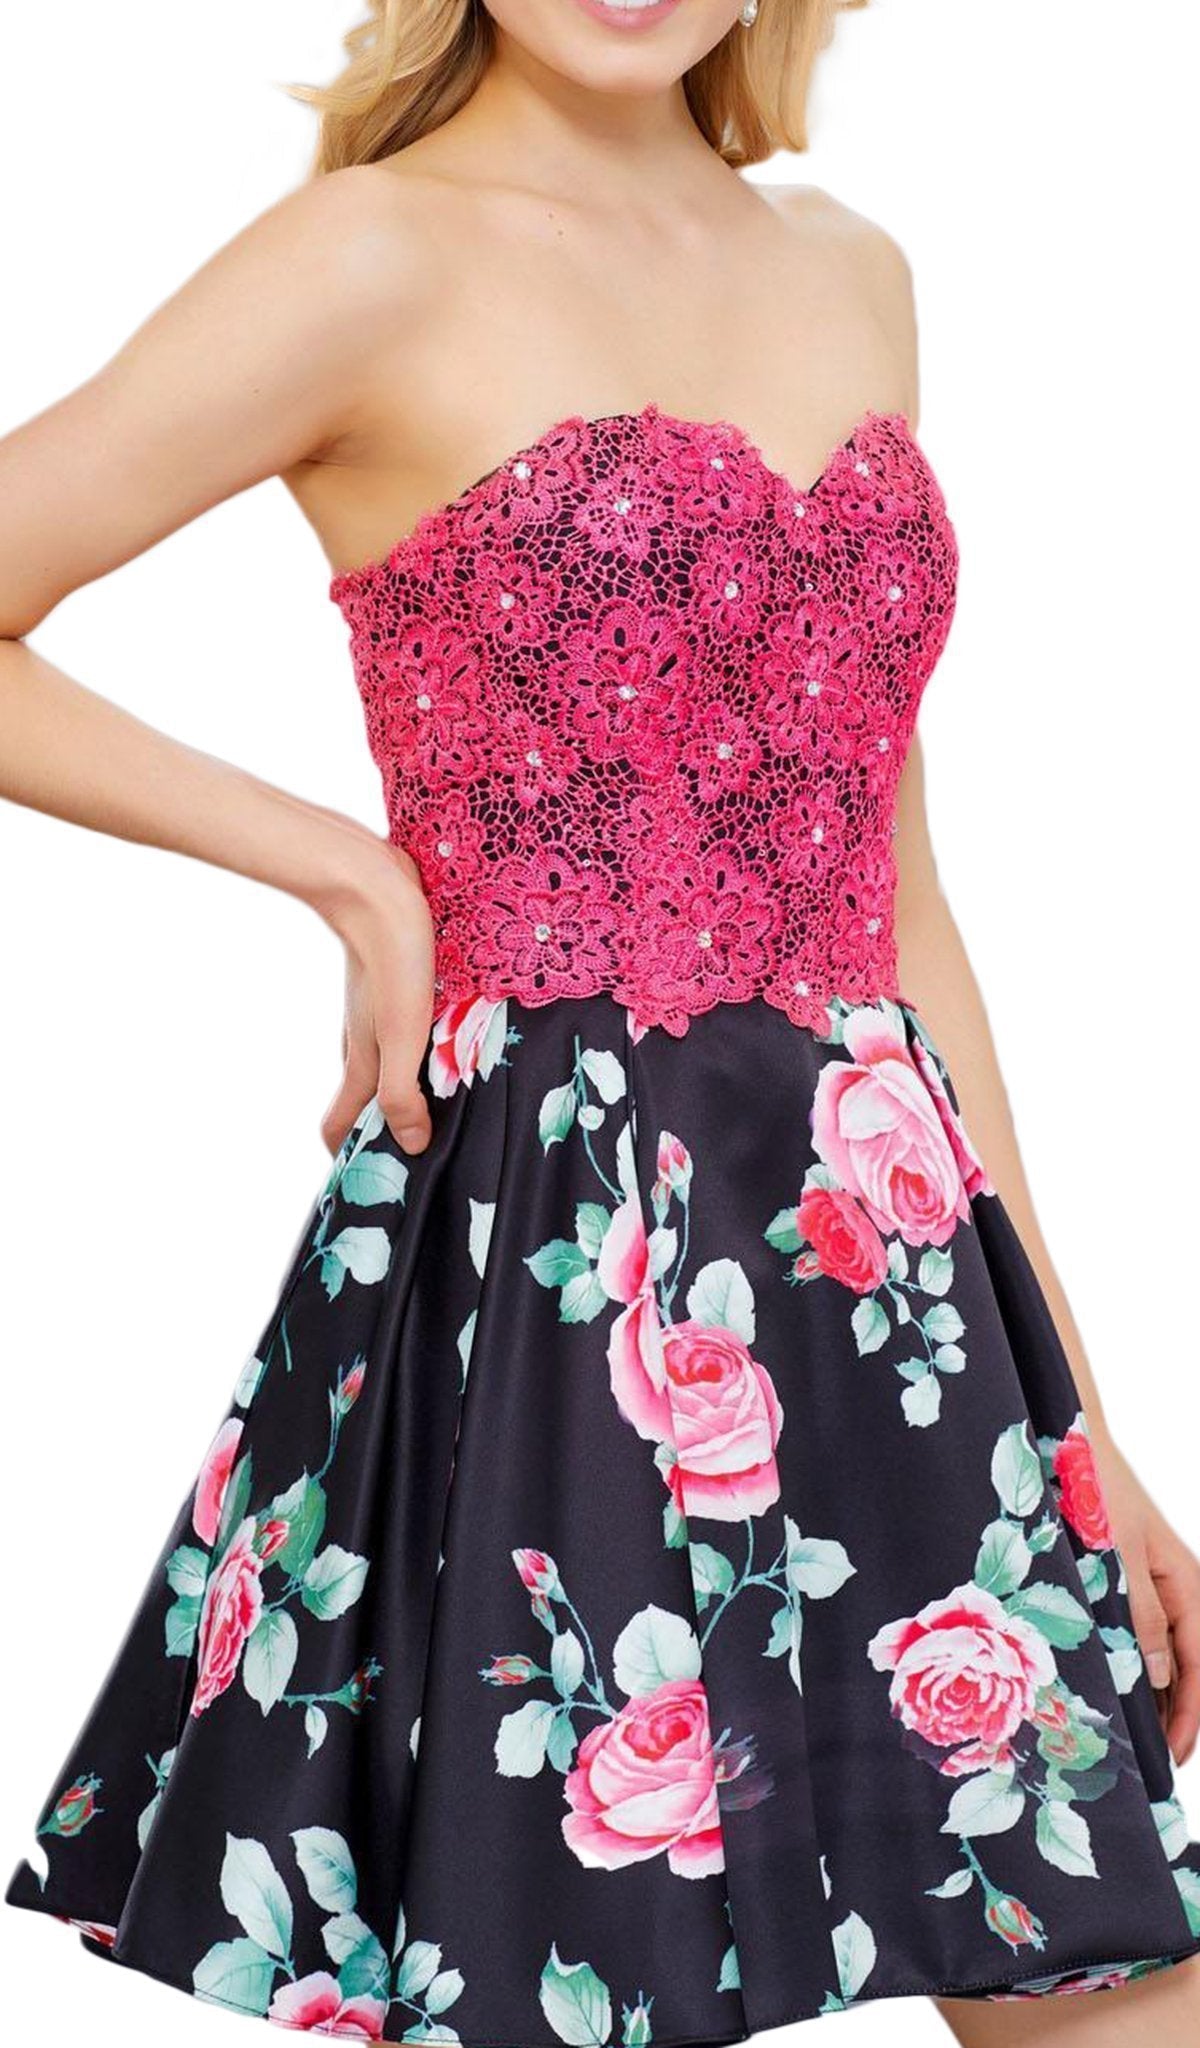 Nox Anabel - 6270 Two-Piece Lace Corset Floral Cocktail Dress Special Occasion Dress